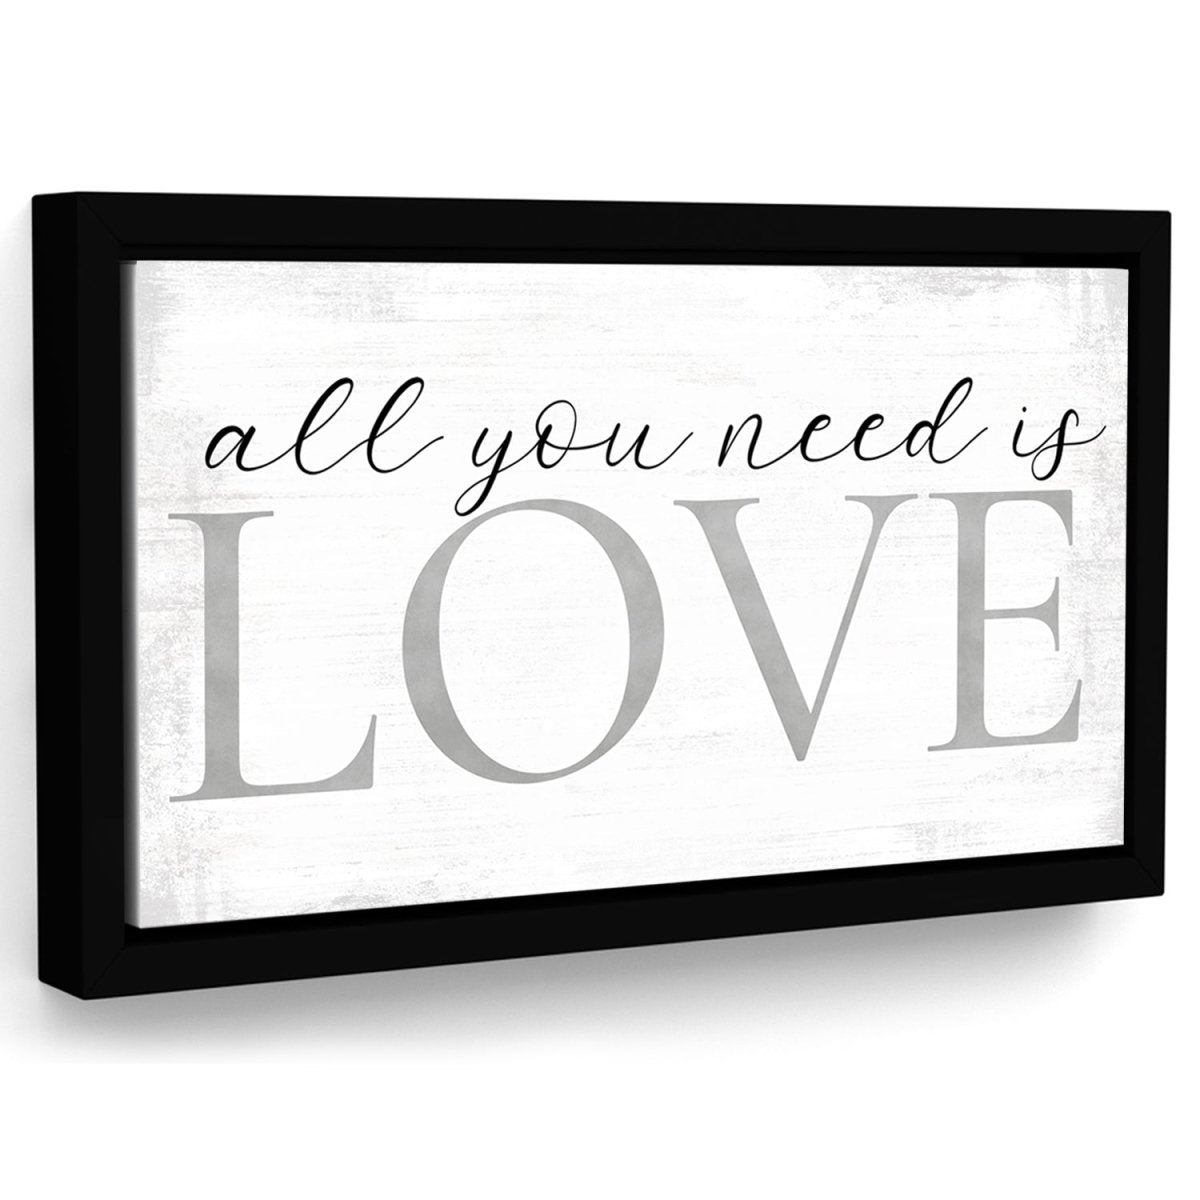 All you need is love - Art Starts